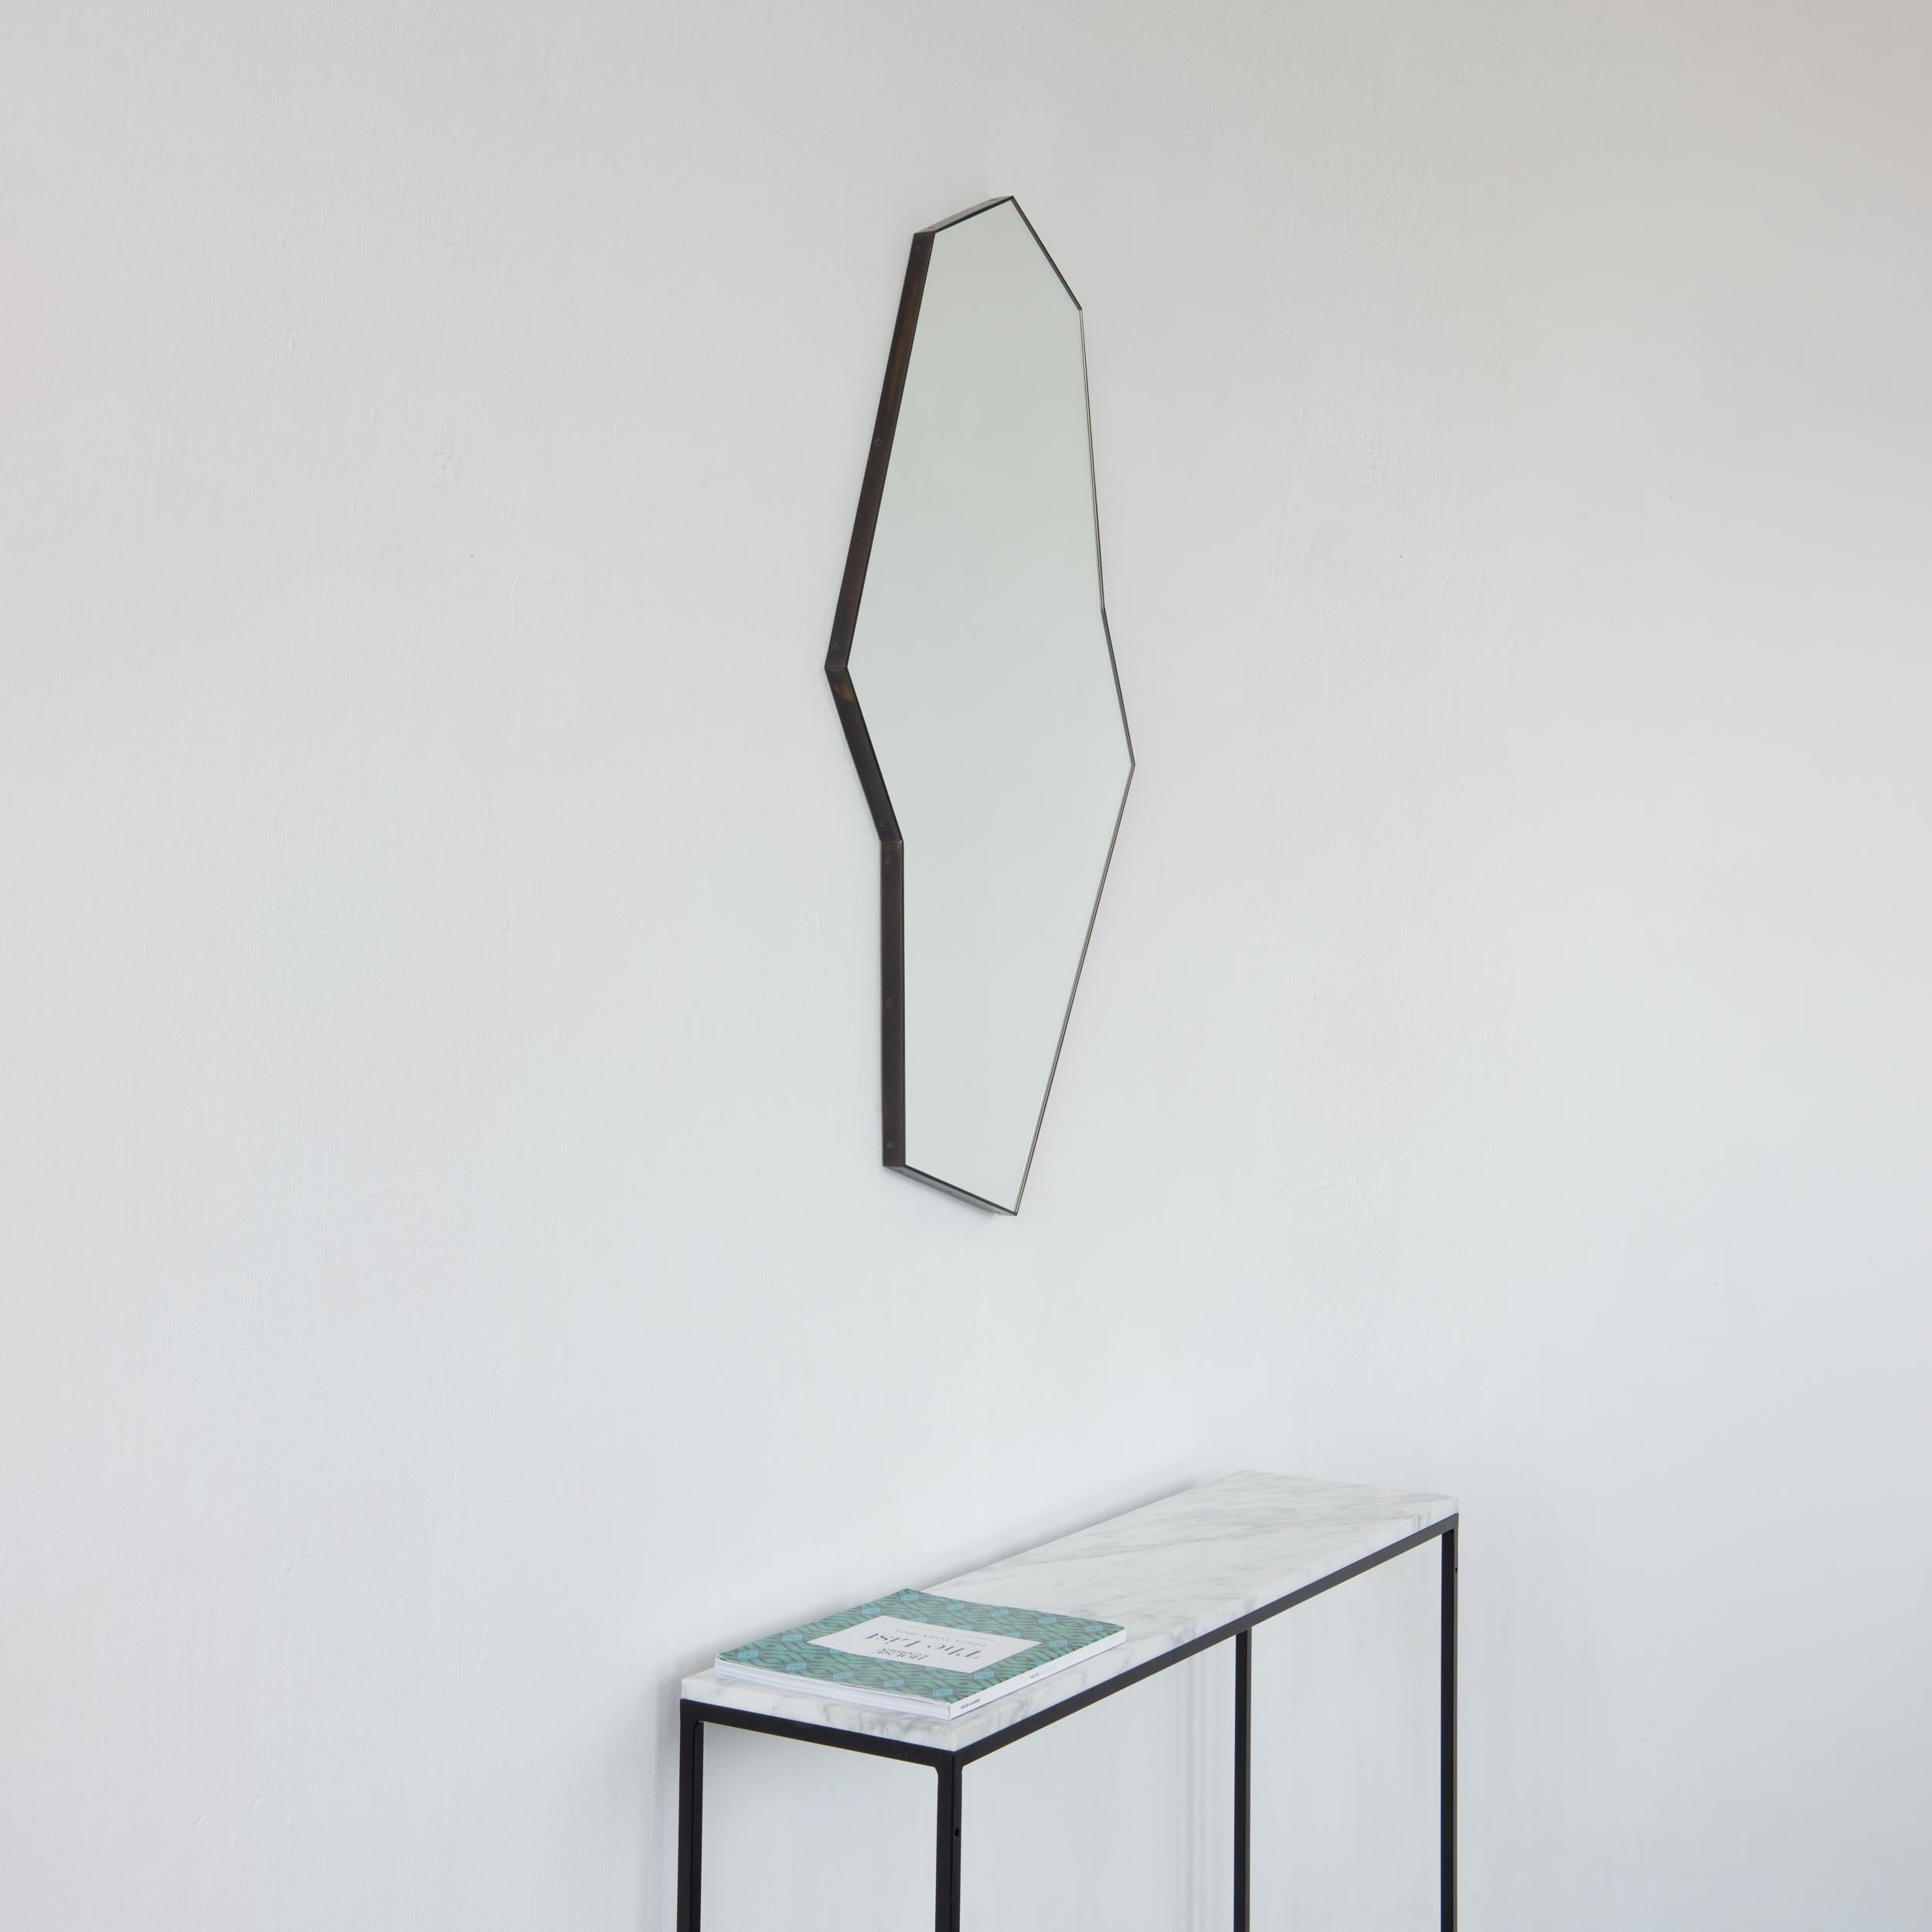 Inspired by Art Deco artists who used geometric shapes to create a futuristic look, this new addition to our collection of organic irregular shaped mirrors stands out with its straight and modern lines. Designed and handcrafted in London, UK.

The